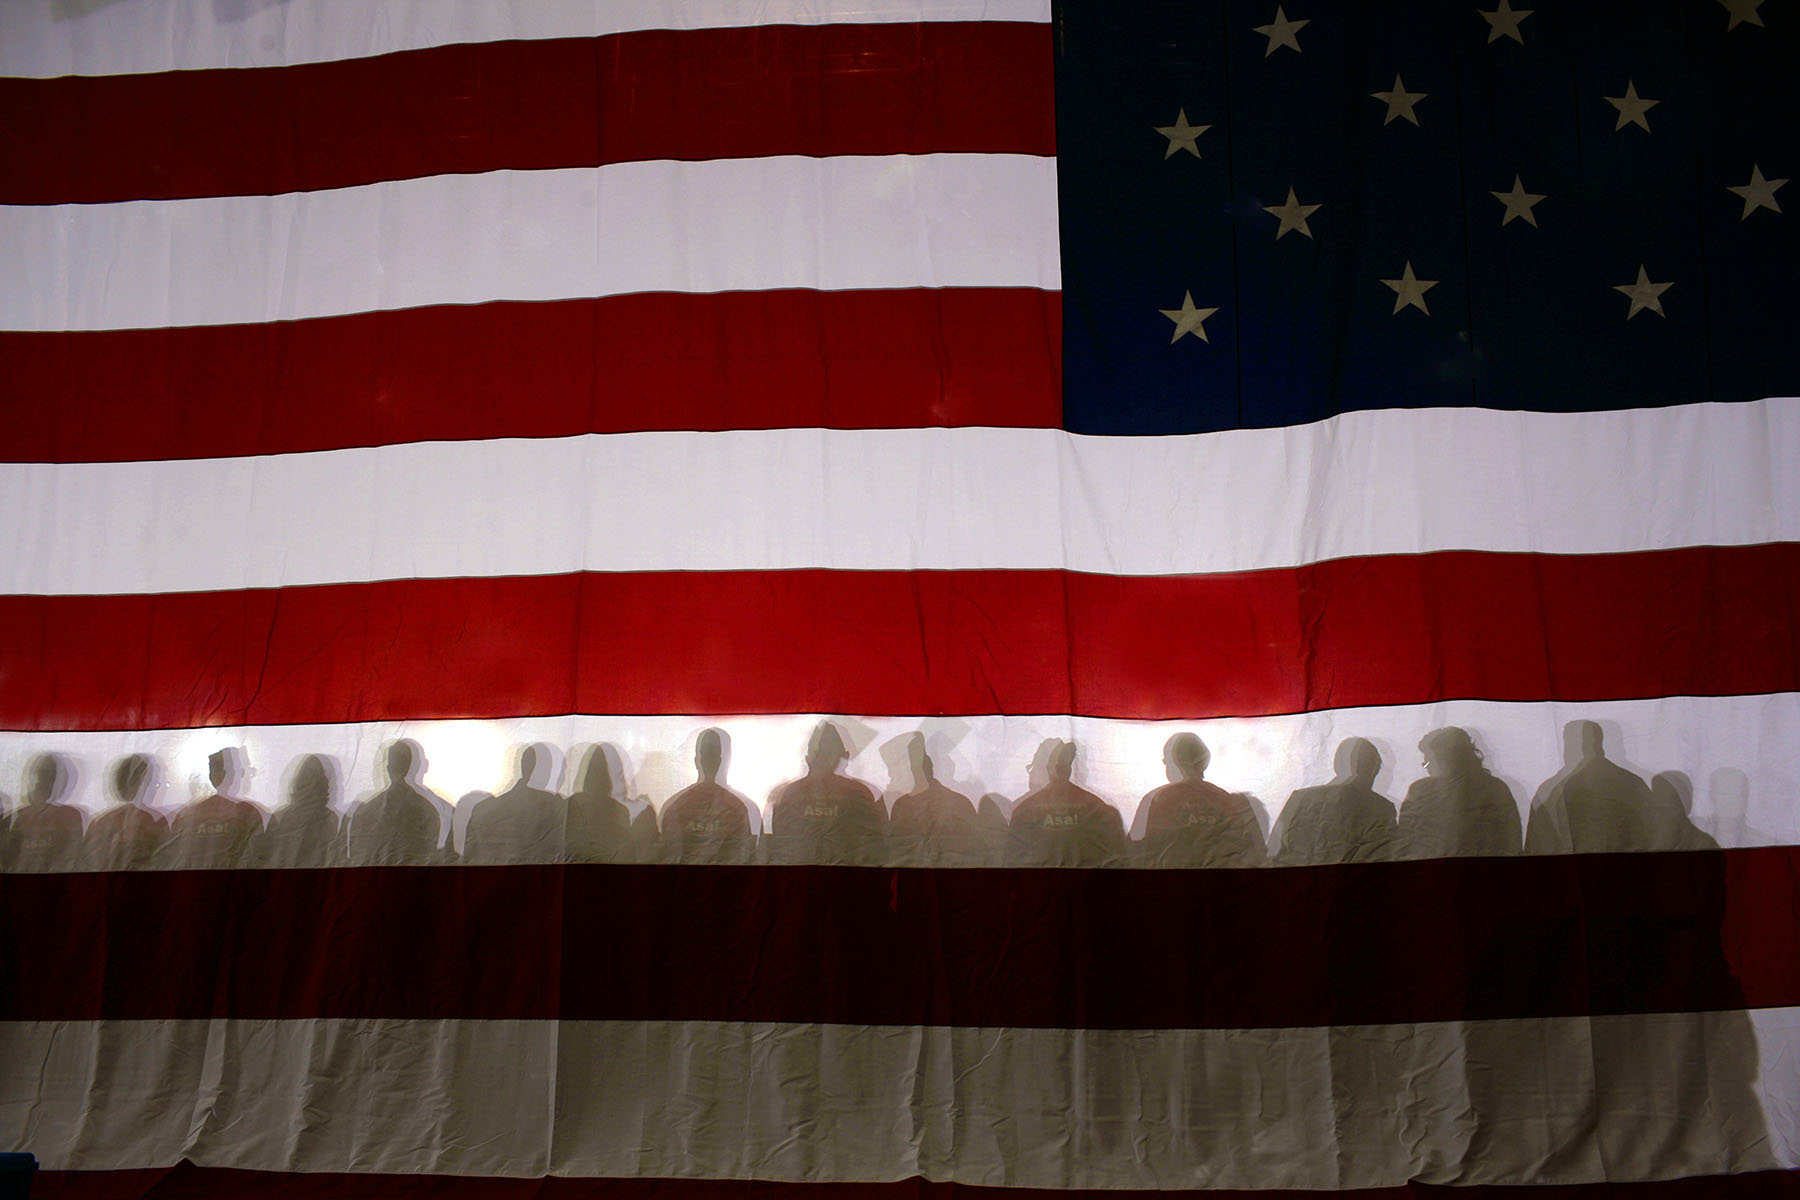 Supporters sit in front of an AMerican flag while listening to President George W. Bush speak at a Republican Party congressional mid-term election campaign rally in Bentonville, Arkansas, November 6, 2006.Photo by Brooks Kraft/Corbis